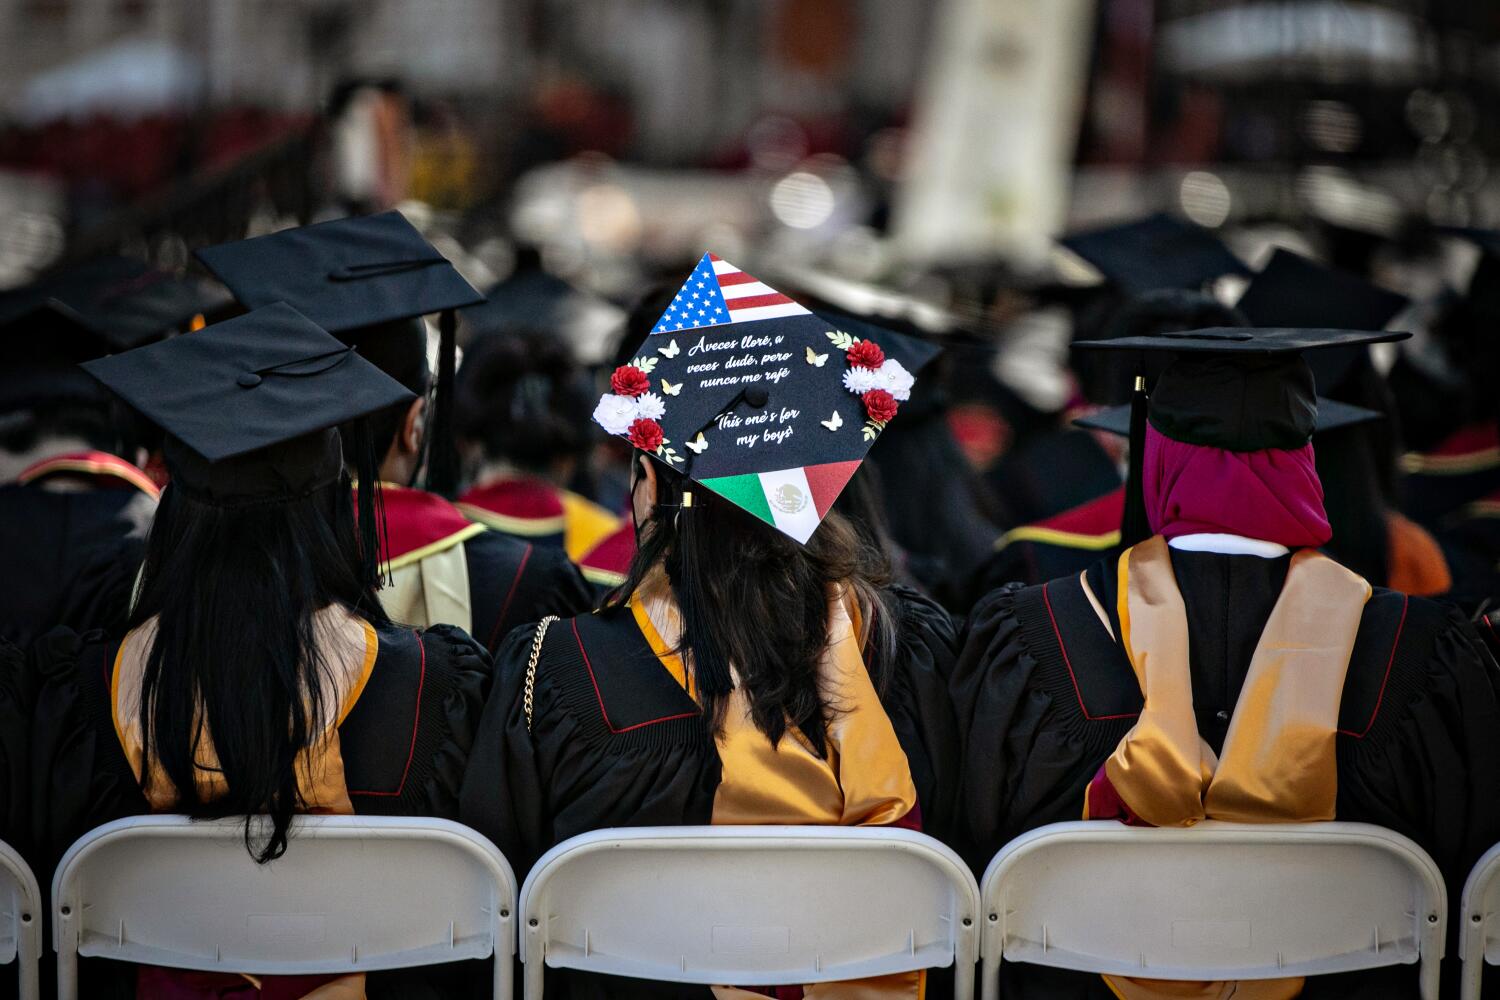 Editorial: The demise of liberal arts? Students lose when colleges trade humanities for STEM